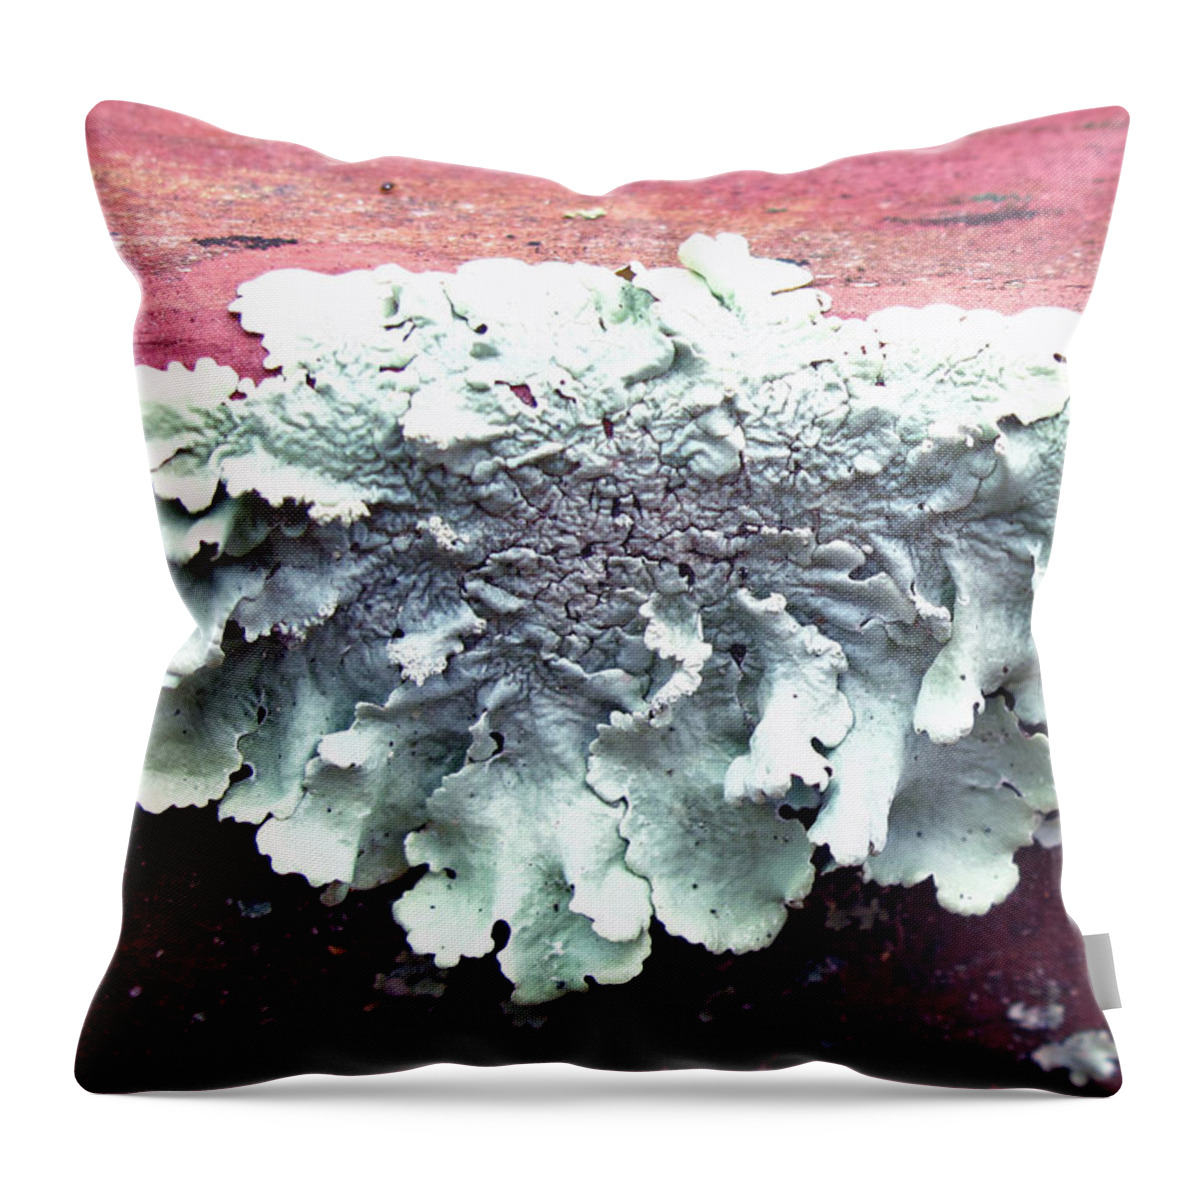 Floral Throw Pillow featuring the photograph Mold Portrait by Barbara McDevitt